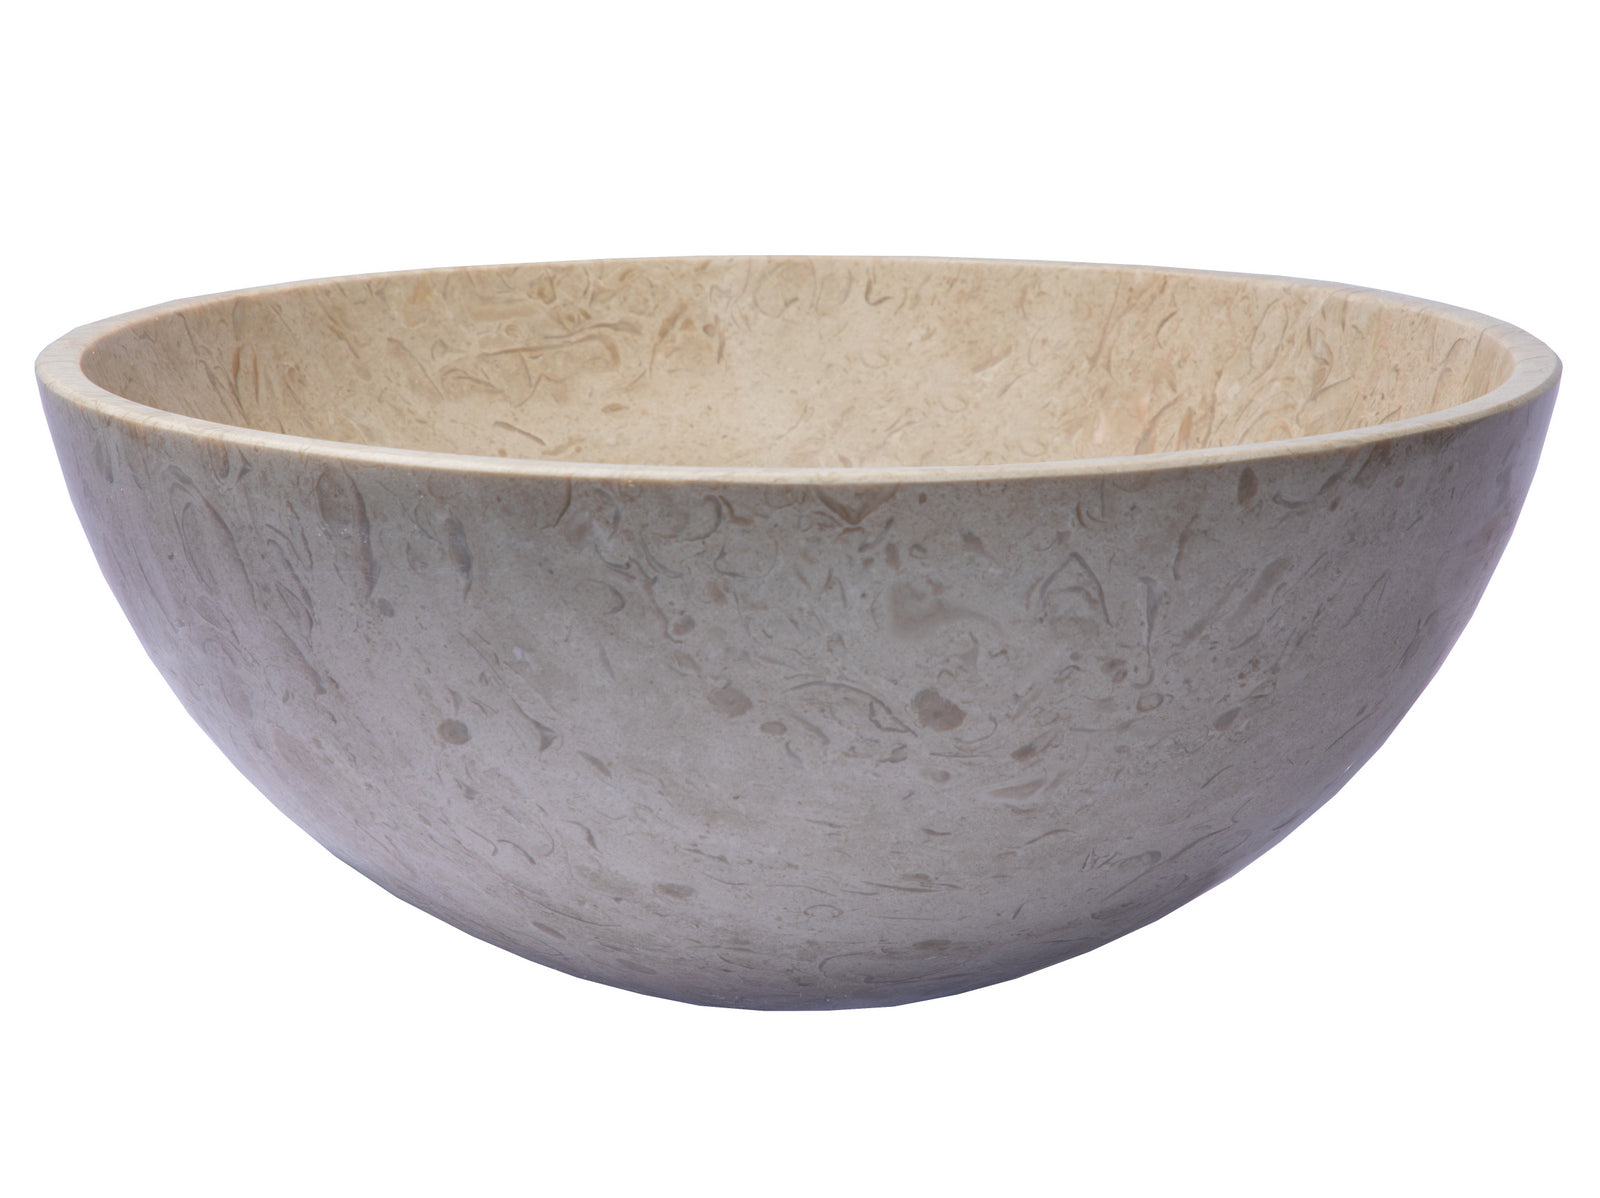 Small Vessel Sink Bowl in Polished Penny Grey Marble